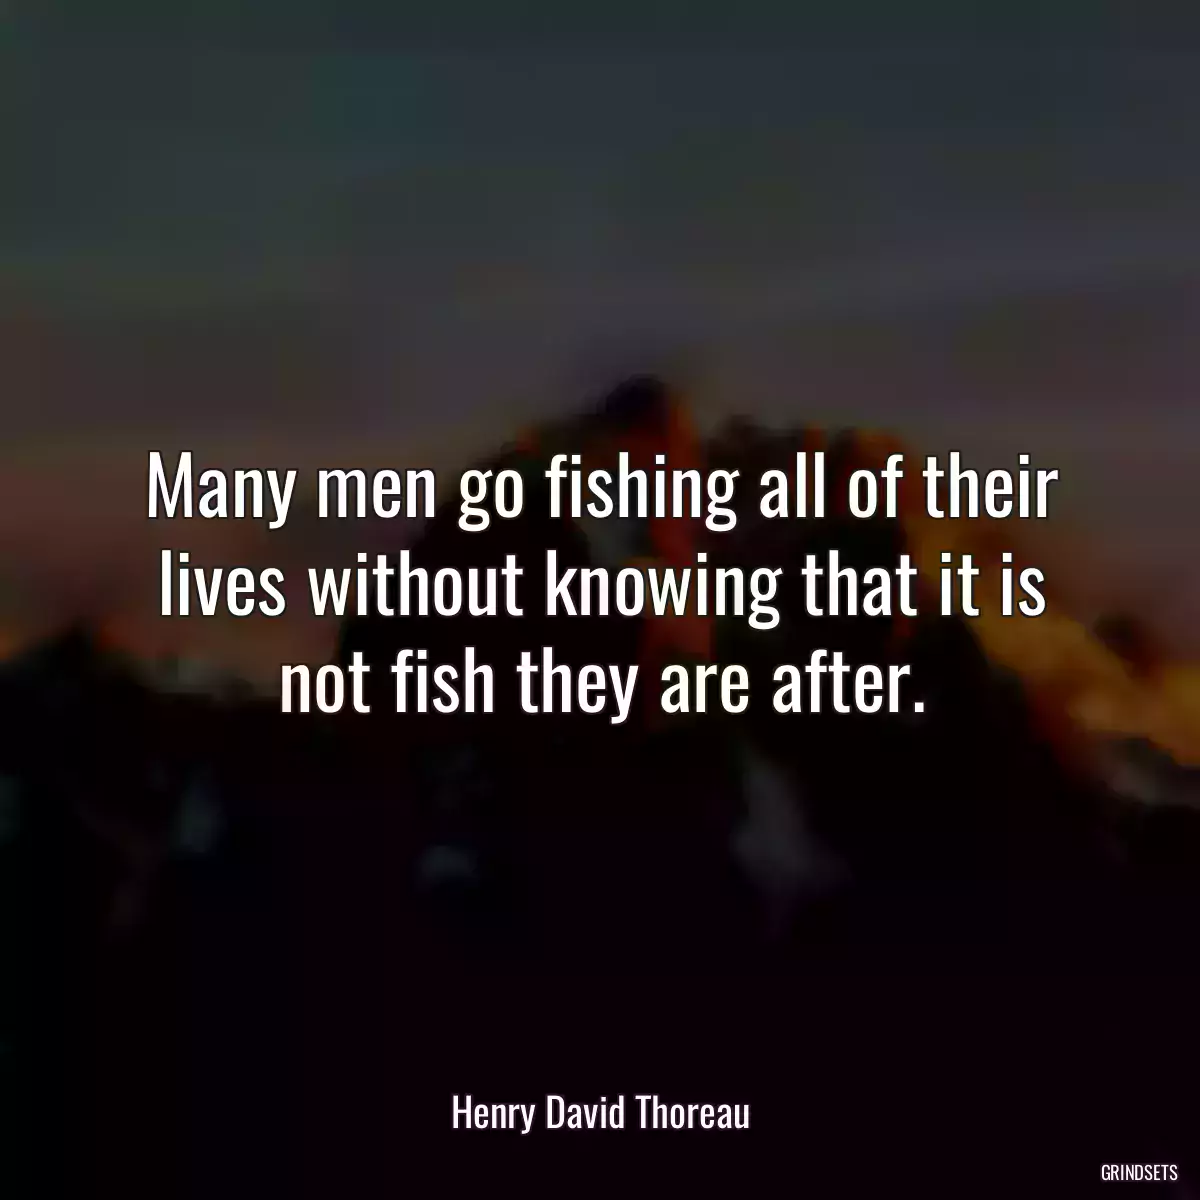 Many men go fishing all of their lives without knowing that it is not fish they are after.